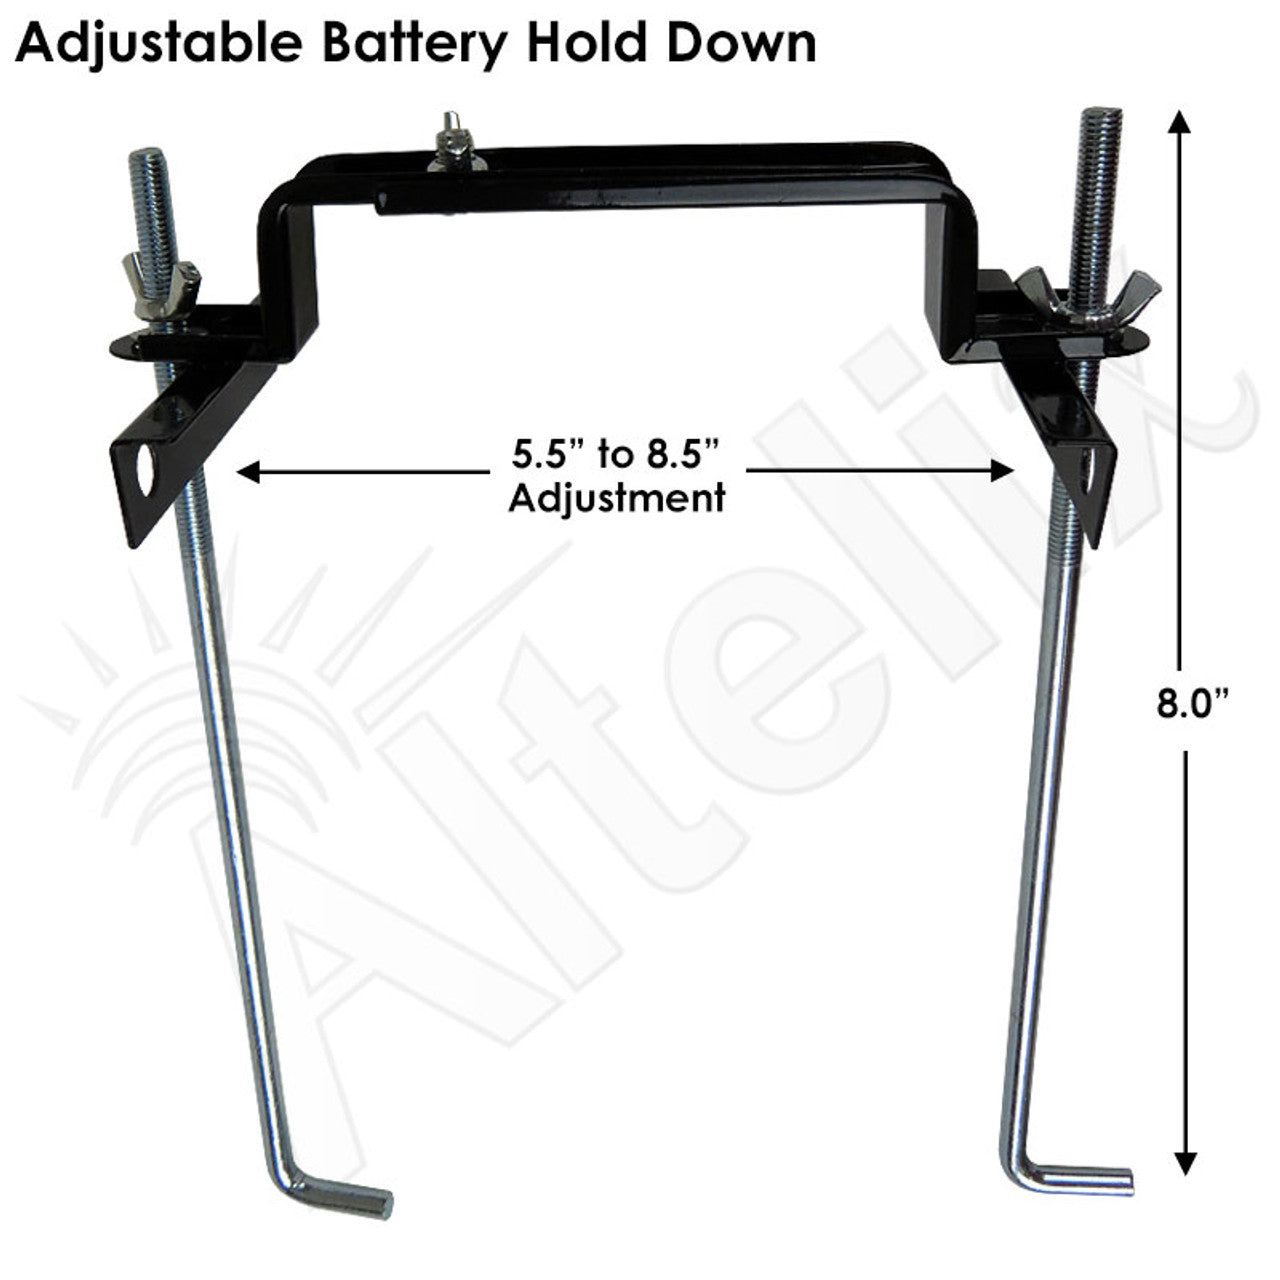 Steel Battery/Utility Shelf with Adjustable Battery Hold Down for NS Enclosures